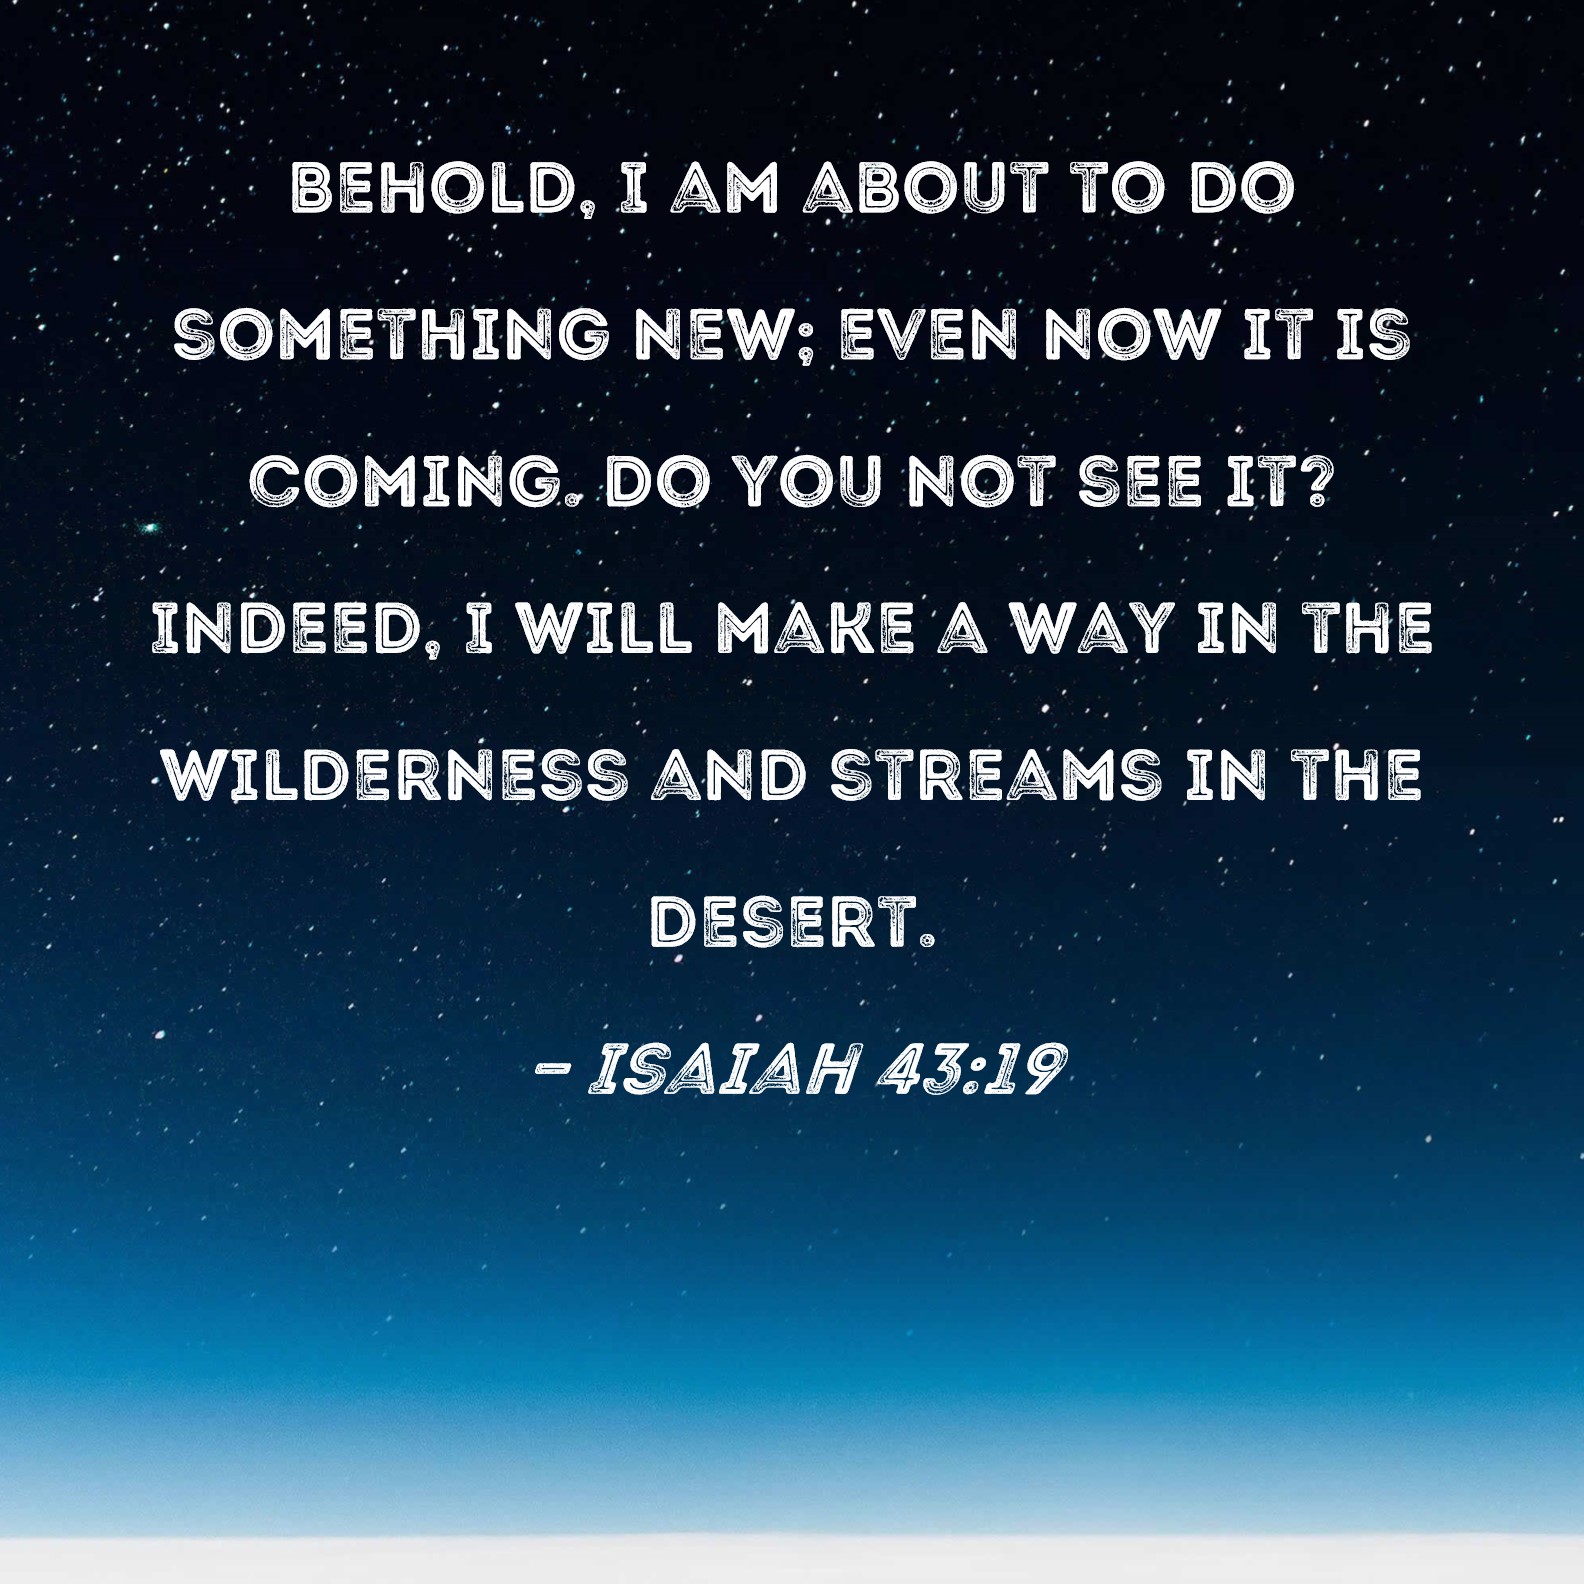 Isaiah 43:18-19 “Remember not the former things, nor consider the things of  old. Behold, I am doing a new thing; now it springs forth, do you not  perceive it? I will make